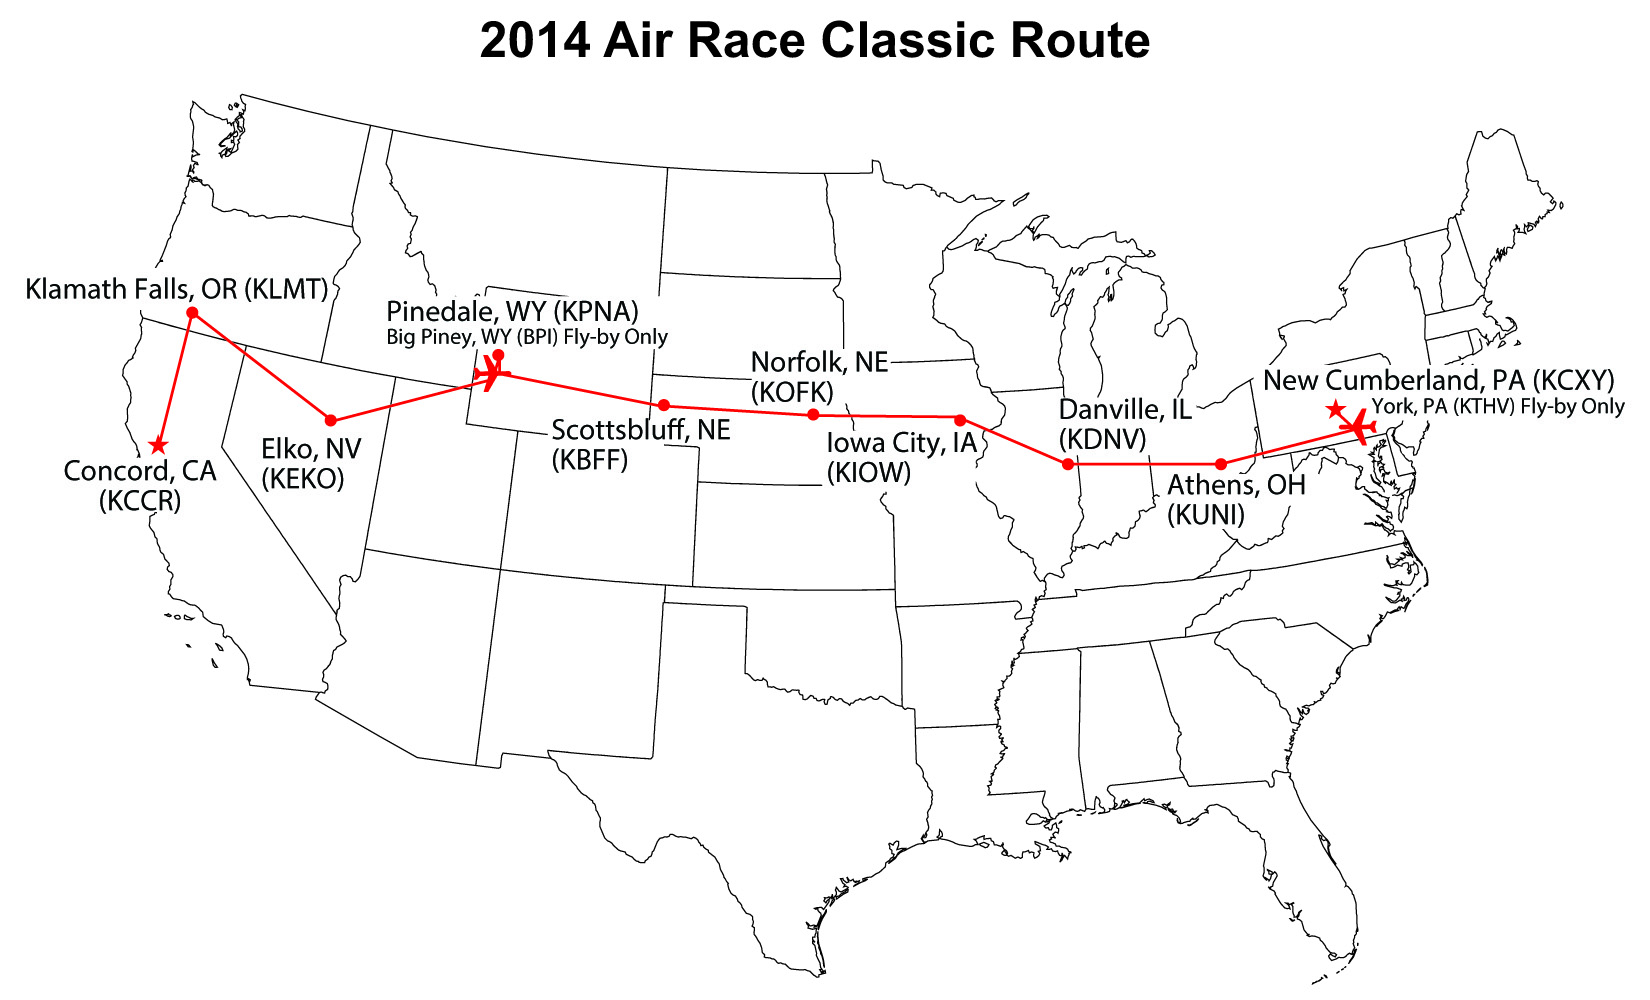 2014 Air Race Classic Route